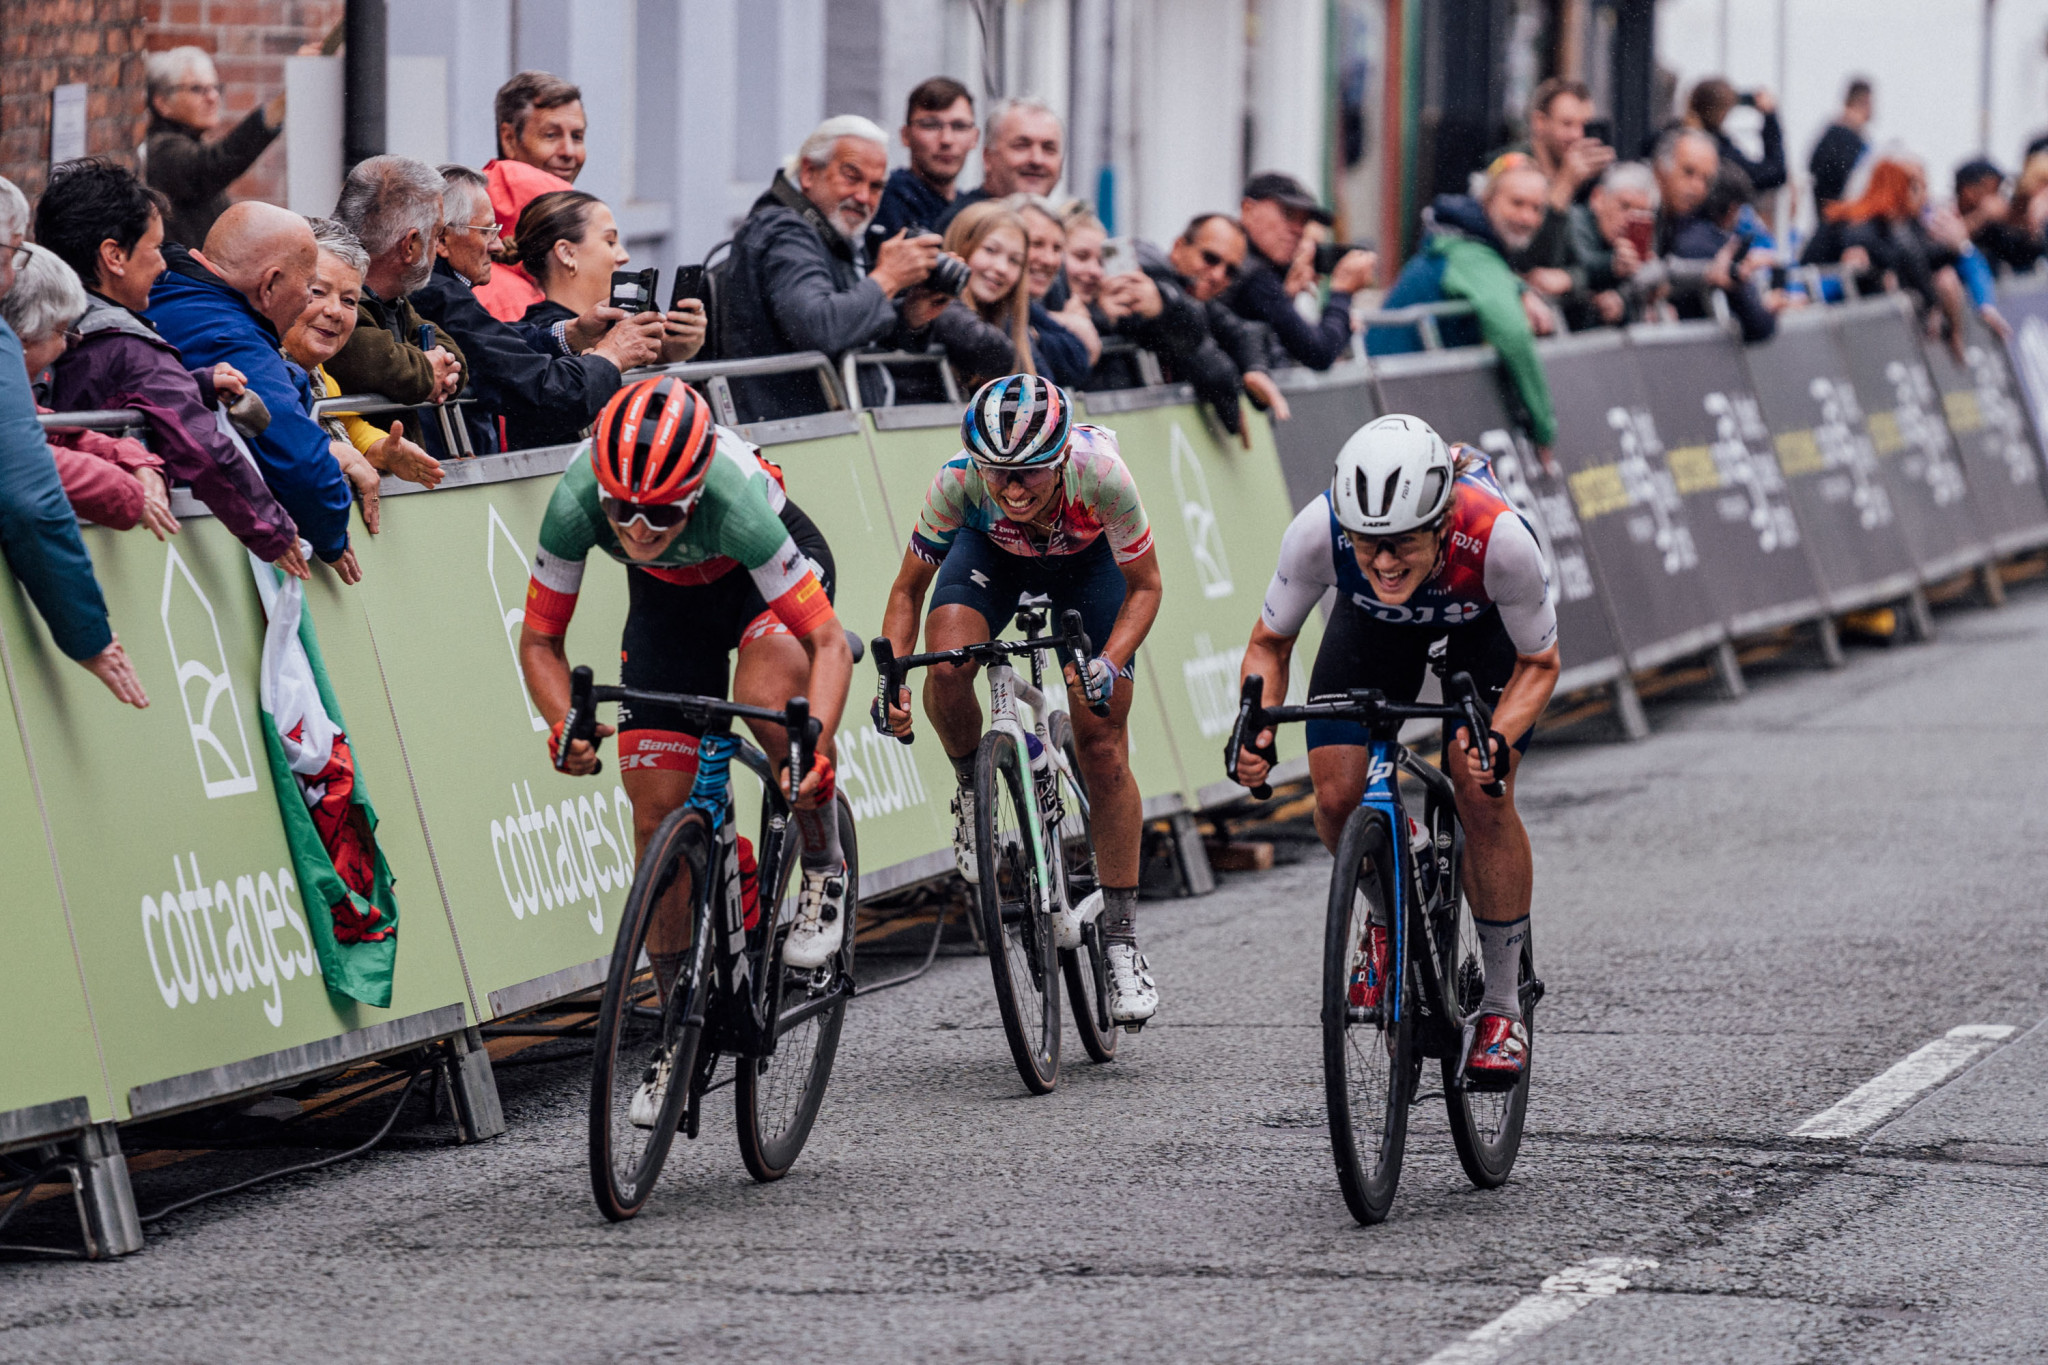 This year's The Women's Tour in the United Kingdom, part of the UCI Women's World Tour last year, has been cancelled due to increased costs, organisers have announced ©The Women's Tour